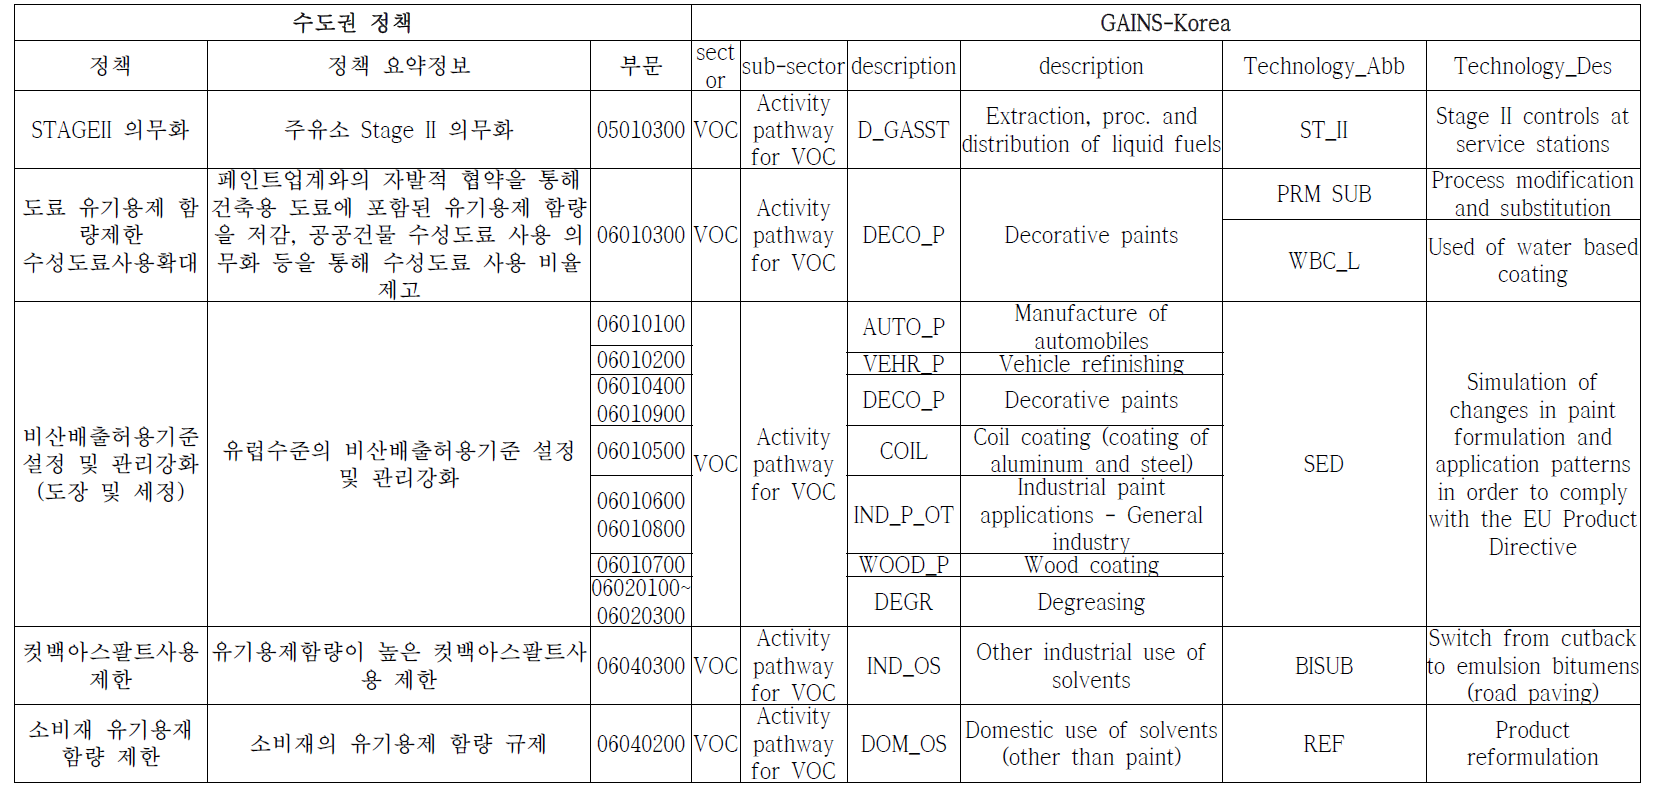 Example of policy mapping table with GAINS-Korea Sector and control Technology (1)